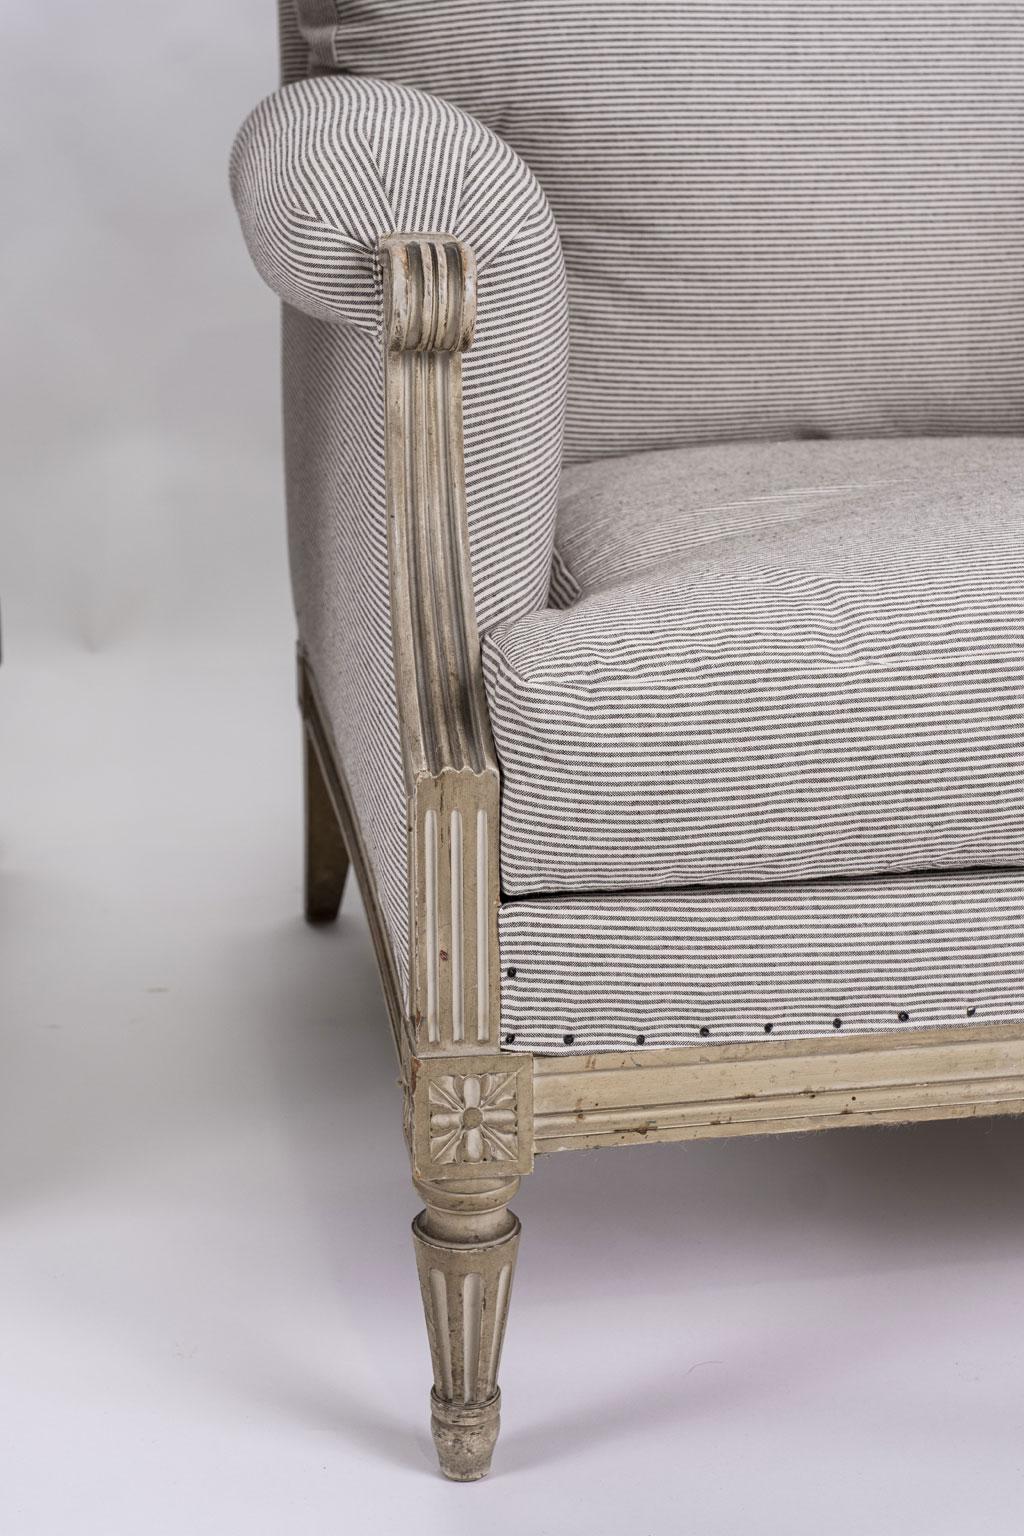 Pair of large scale painted bergère armchairs in ticking: Louis XVI style armchairs (circa 1910) with nice, large comfortable proportions. Painted in light gray and off-white. Newly upholstered in white and gray pinstriped ticking. Sturdy and